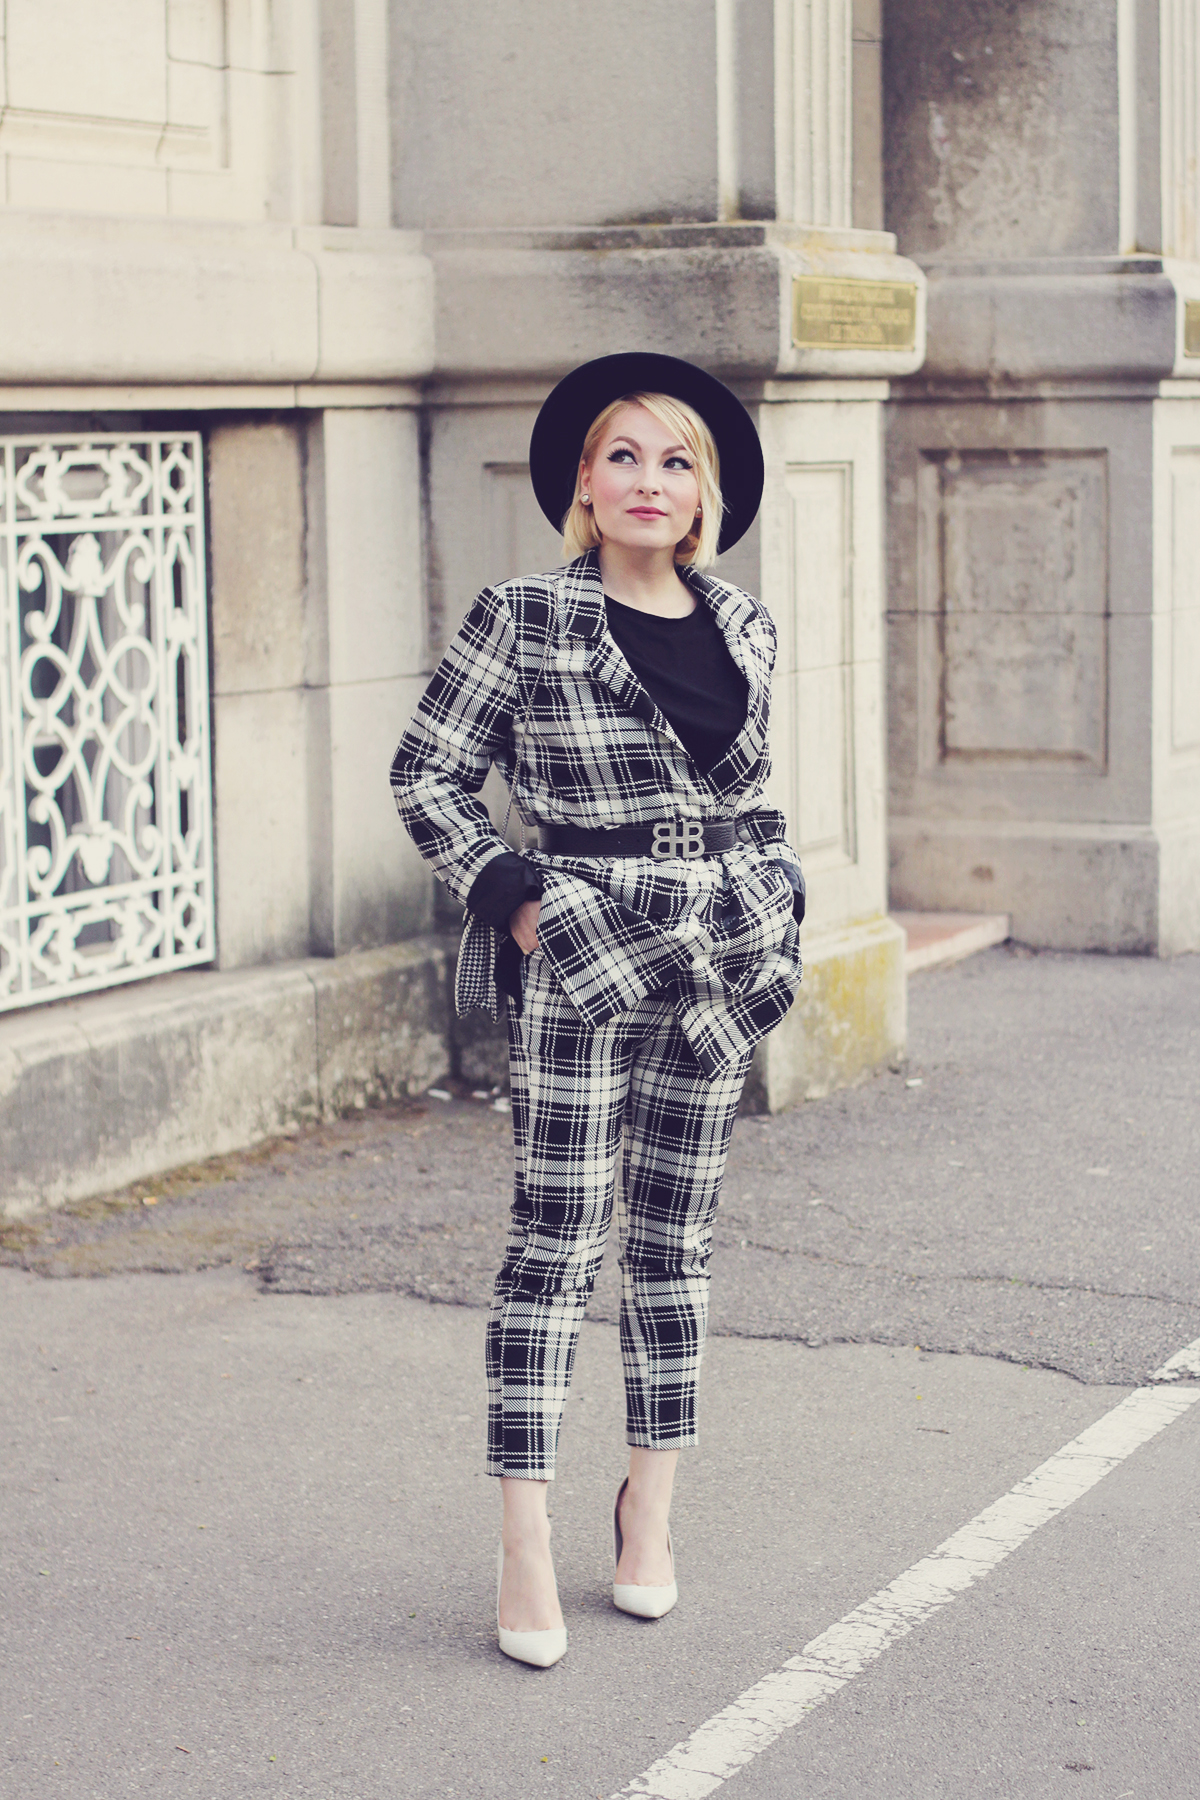 black and white look, office look, Womanfashion.ro checked suit, Hugo Boss belt, fedora hat, white heels, houndstooth Dune London bag, stud earrings, spring, spring fashion